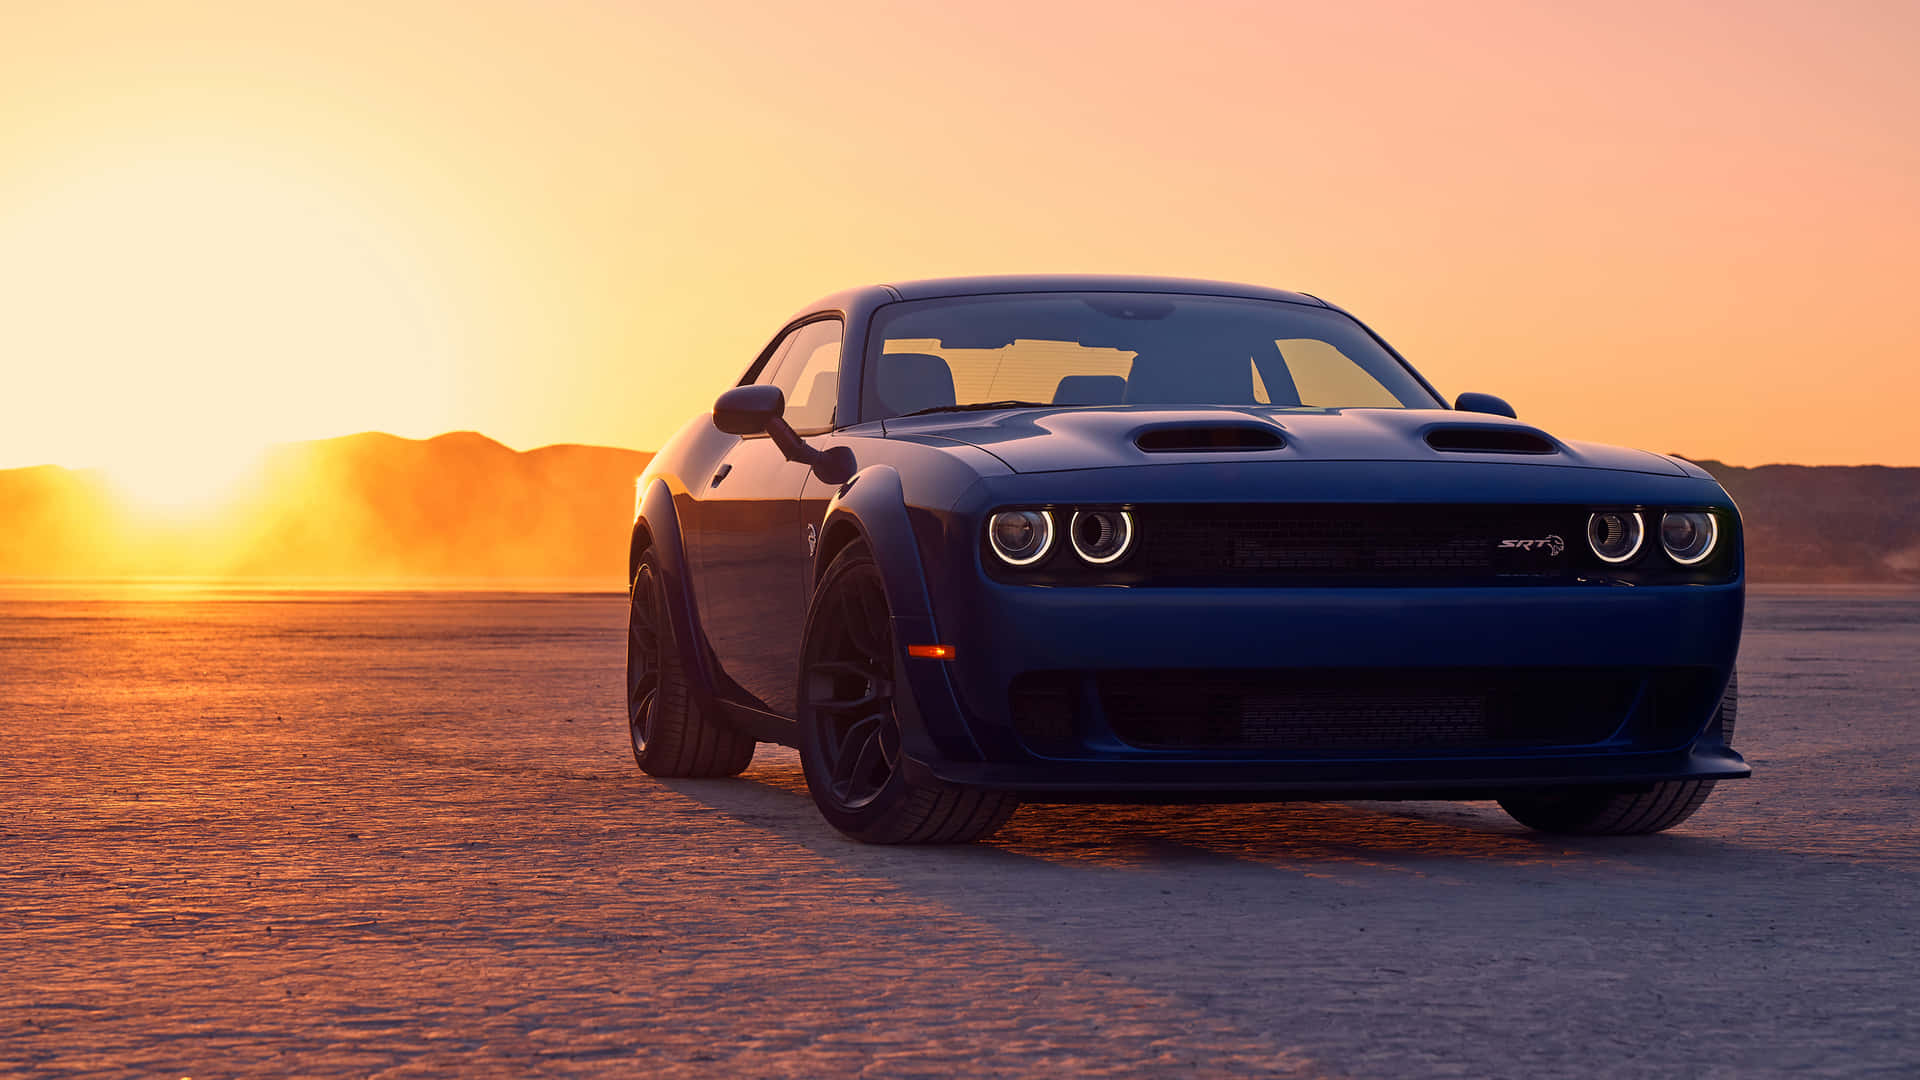 Dodgechallenger Srt Srt Srt Srt Srt Srt Srt Would Be Translated To 